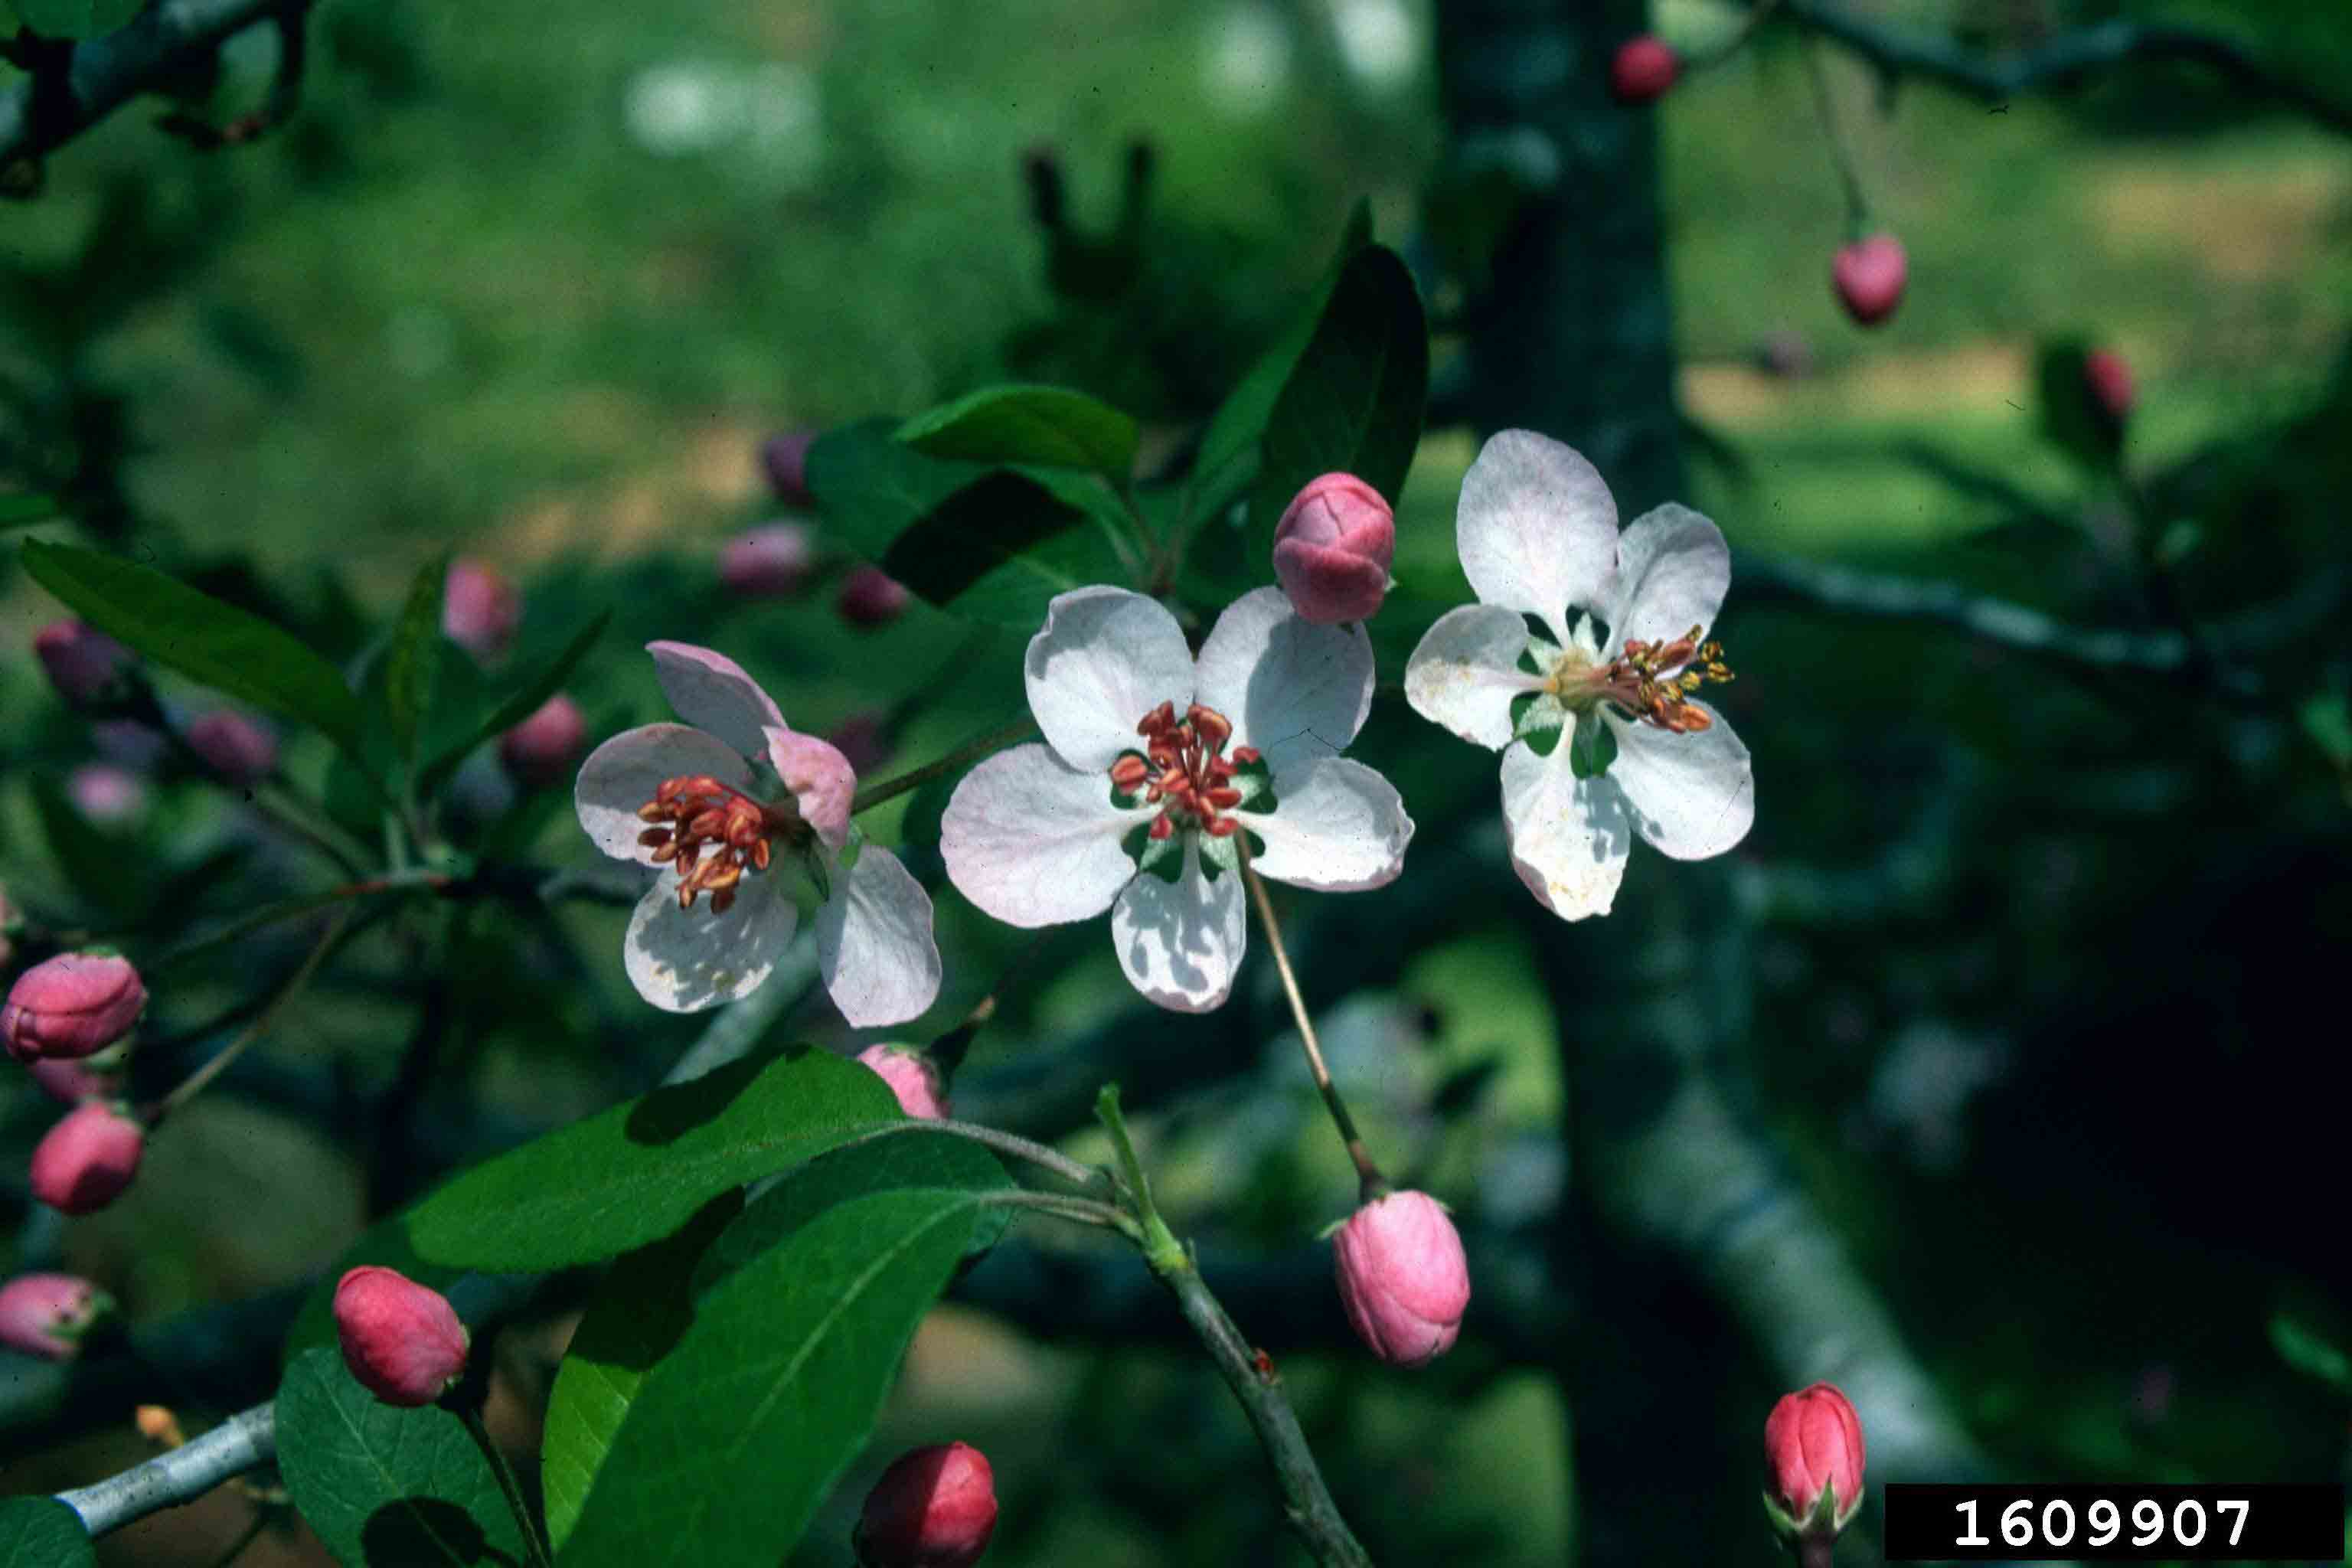 Southern crabapple flowers